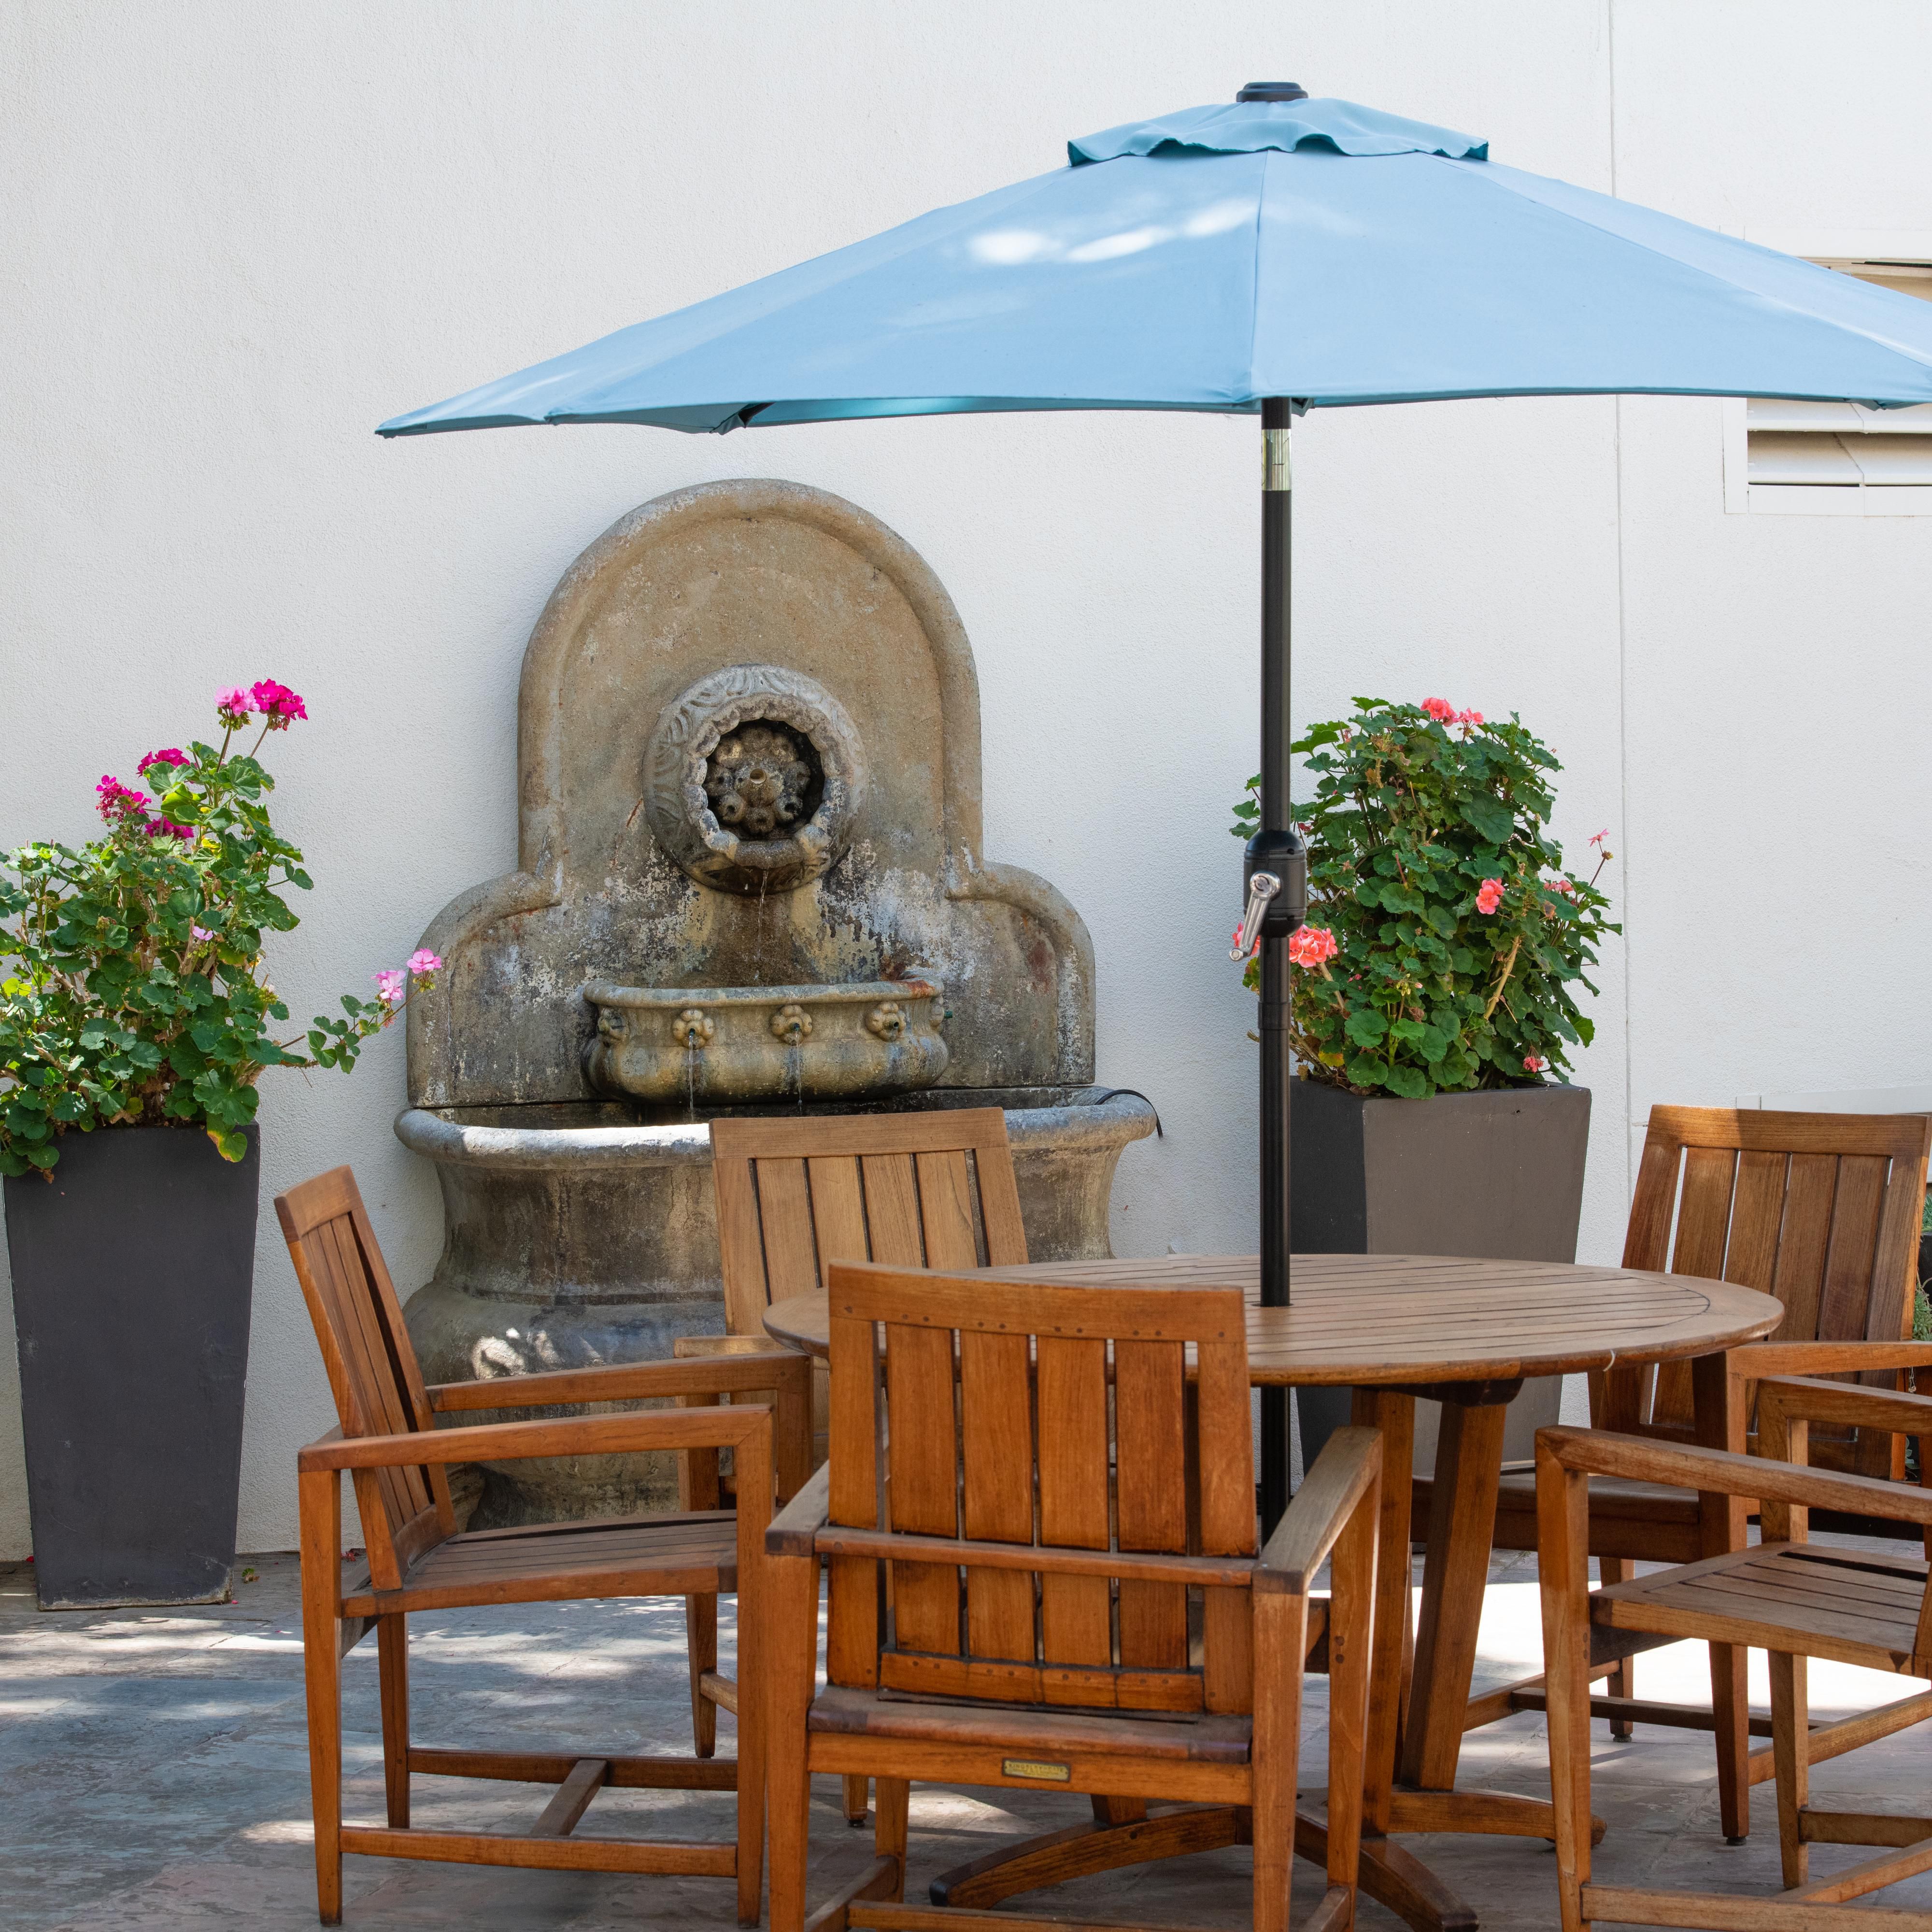 Outdoor courtyard, with ample space for gathering and relaxing.